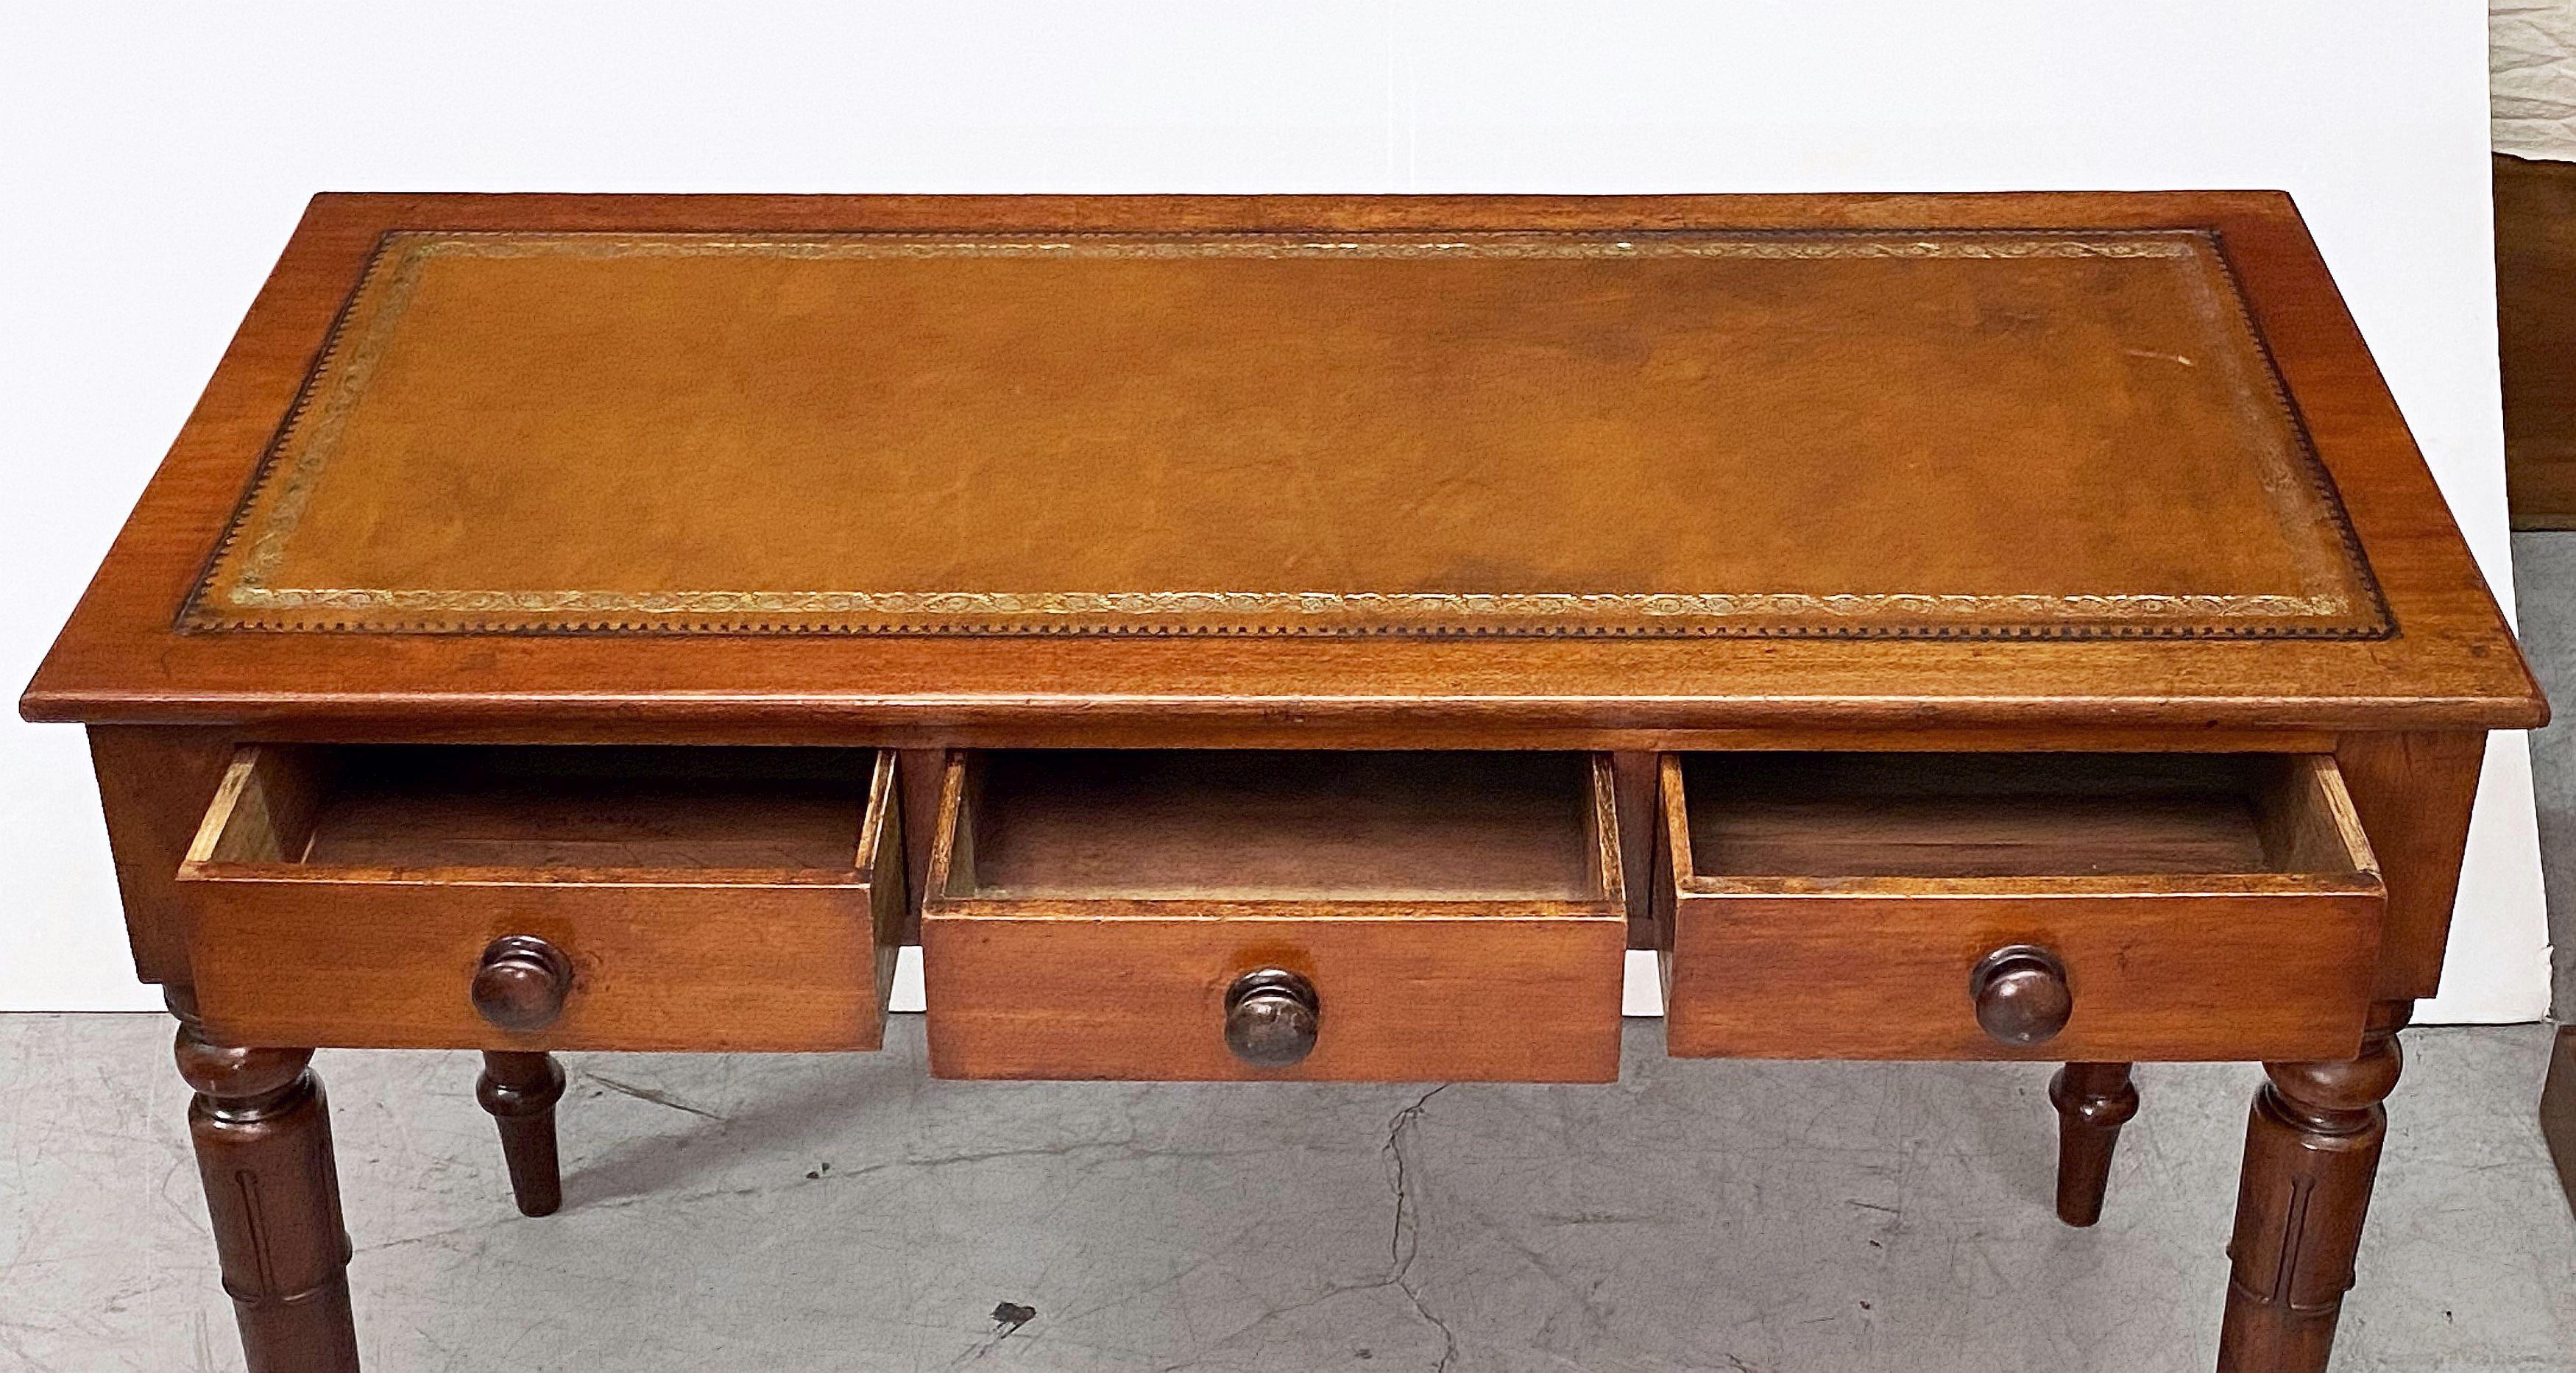 Wood William IV Writing Desk or Table of Mahogany with Leather Top from England